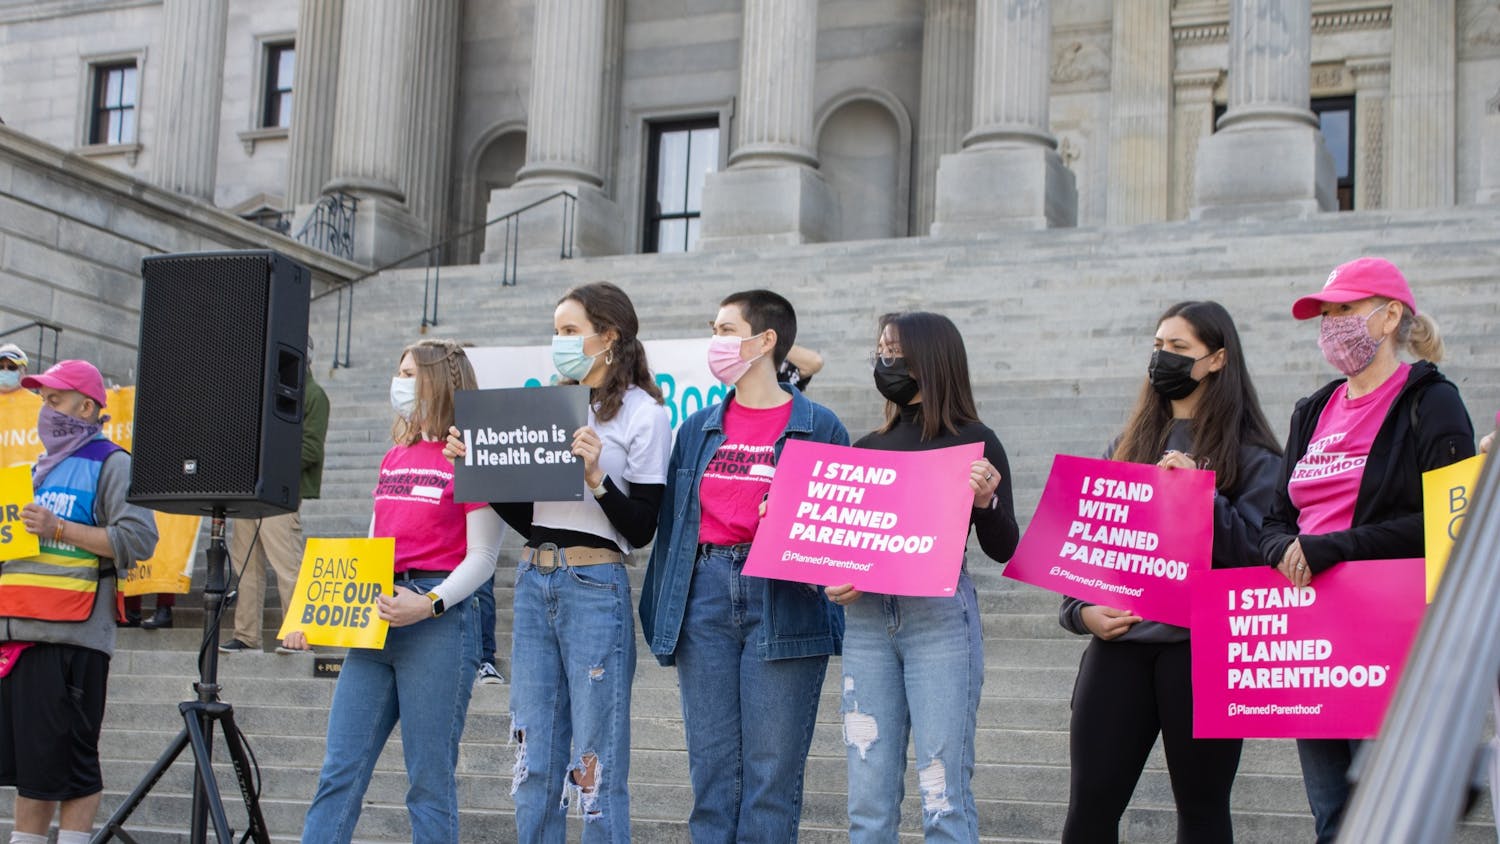 Protestors stand on the steps of the South Carolina capitol building on Feb. 17, 2022. The protestors were part of a demonstration against anti-abortion bills.